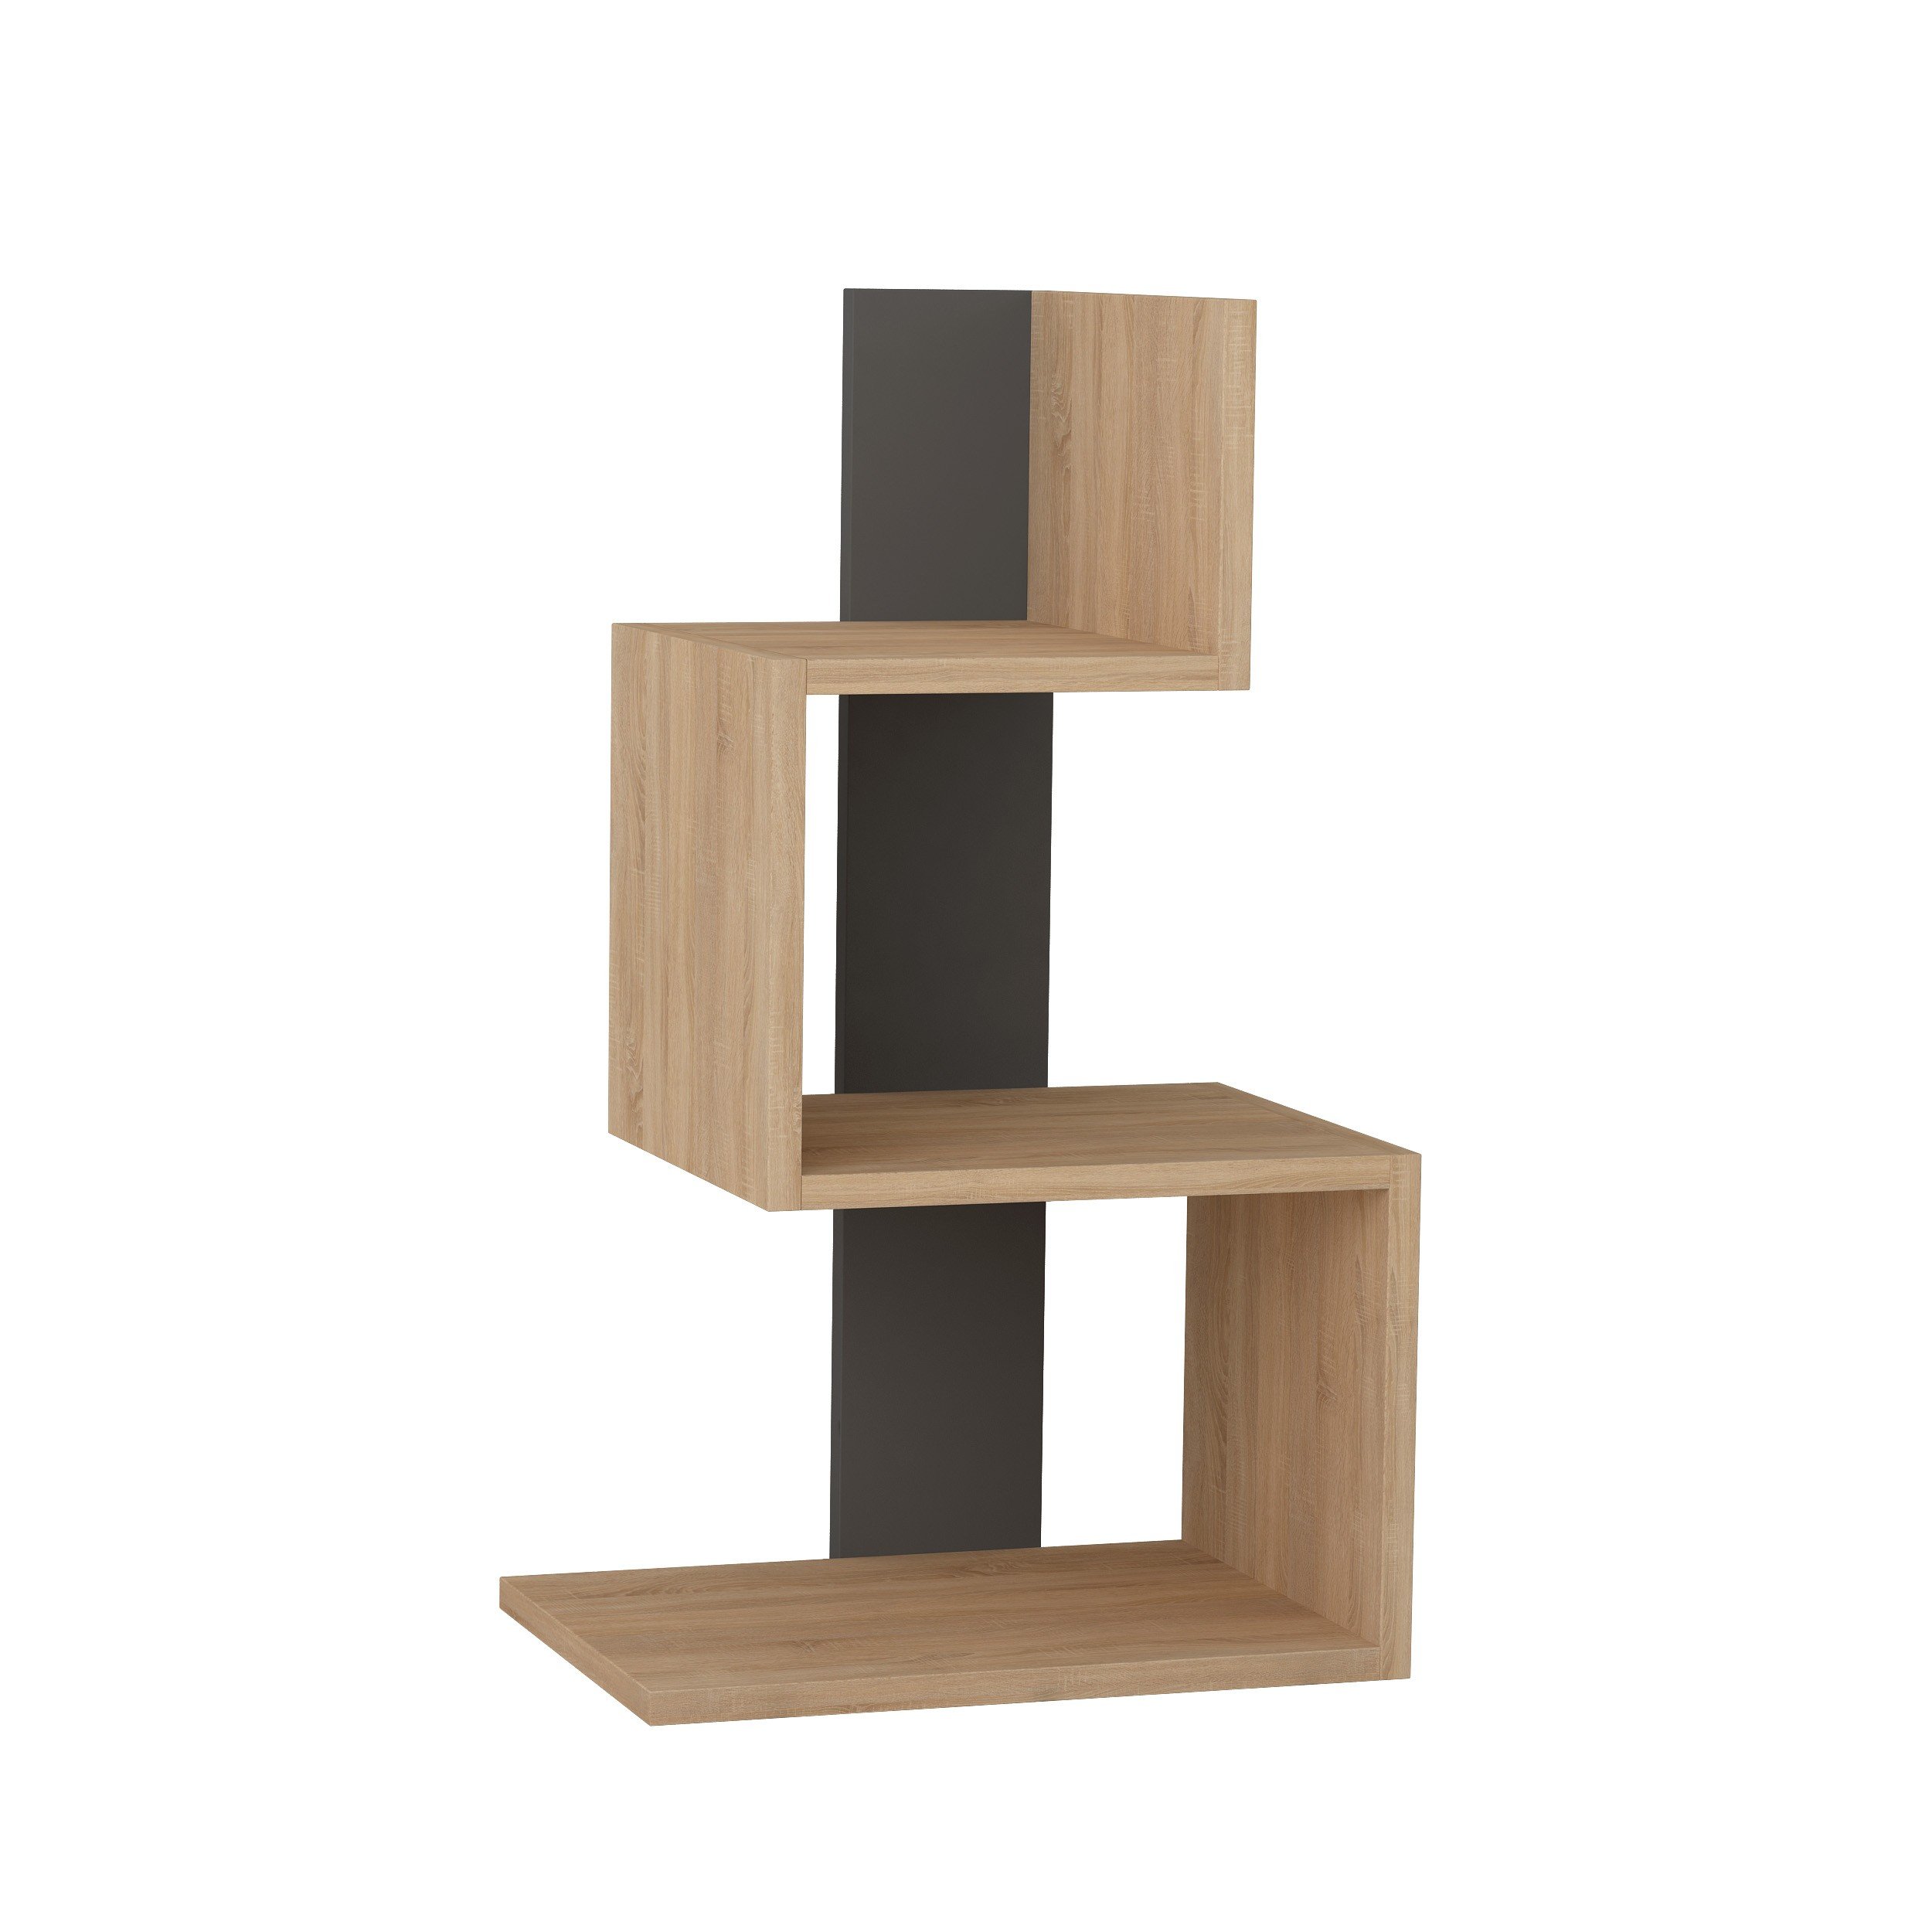 ROSIE SIDE TABLE - OAK - ANTHRACITE - M.SH.16411.5